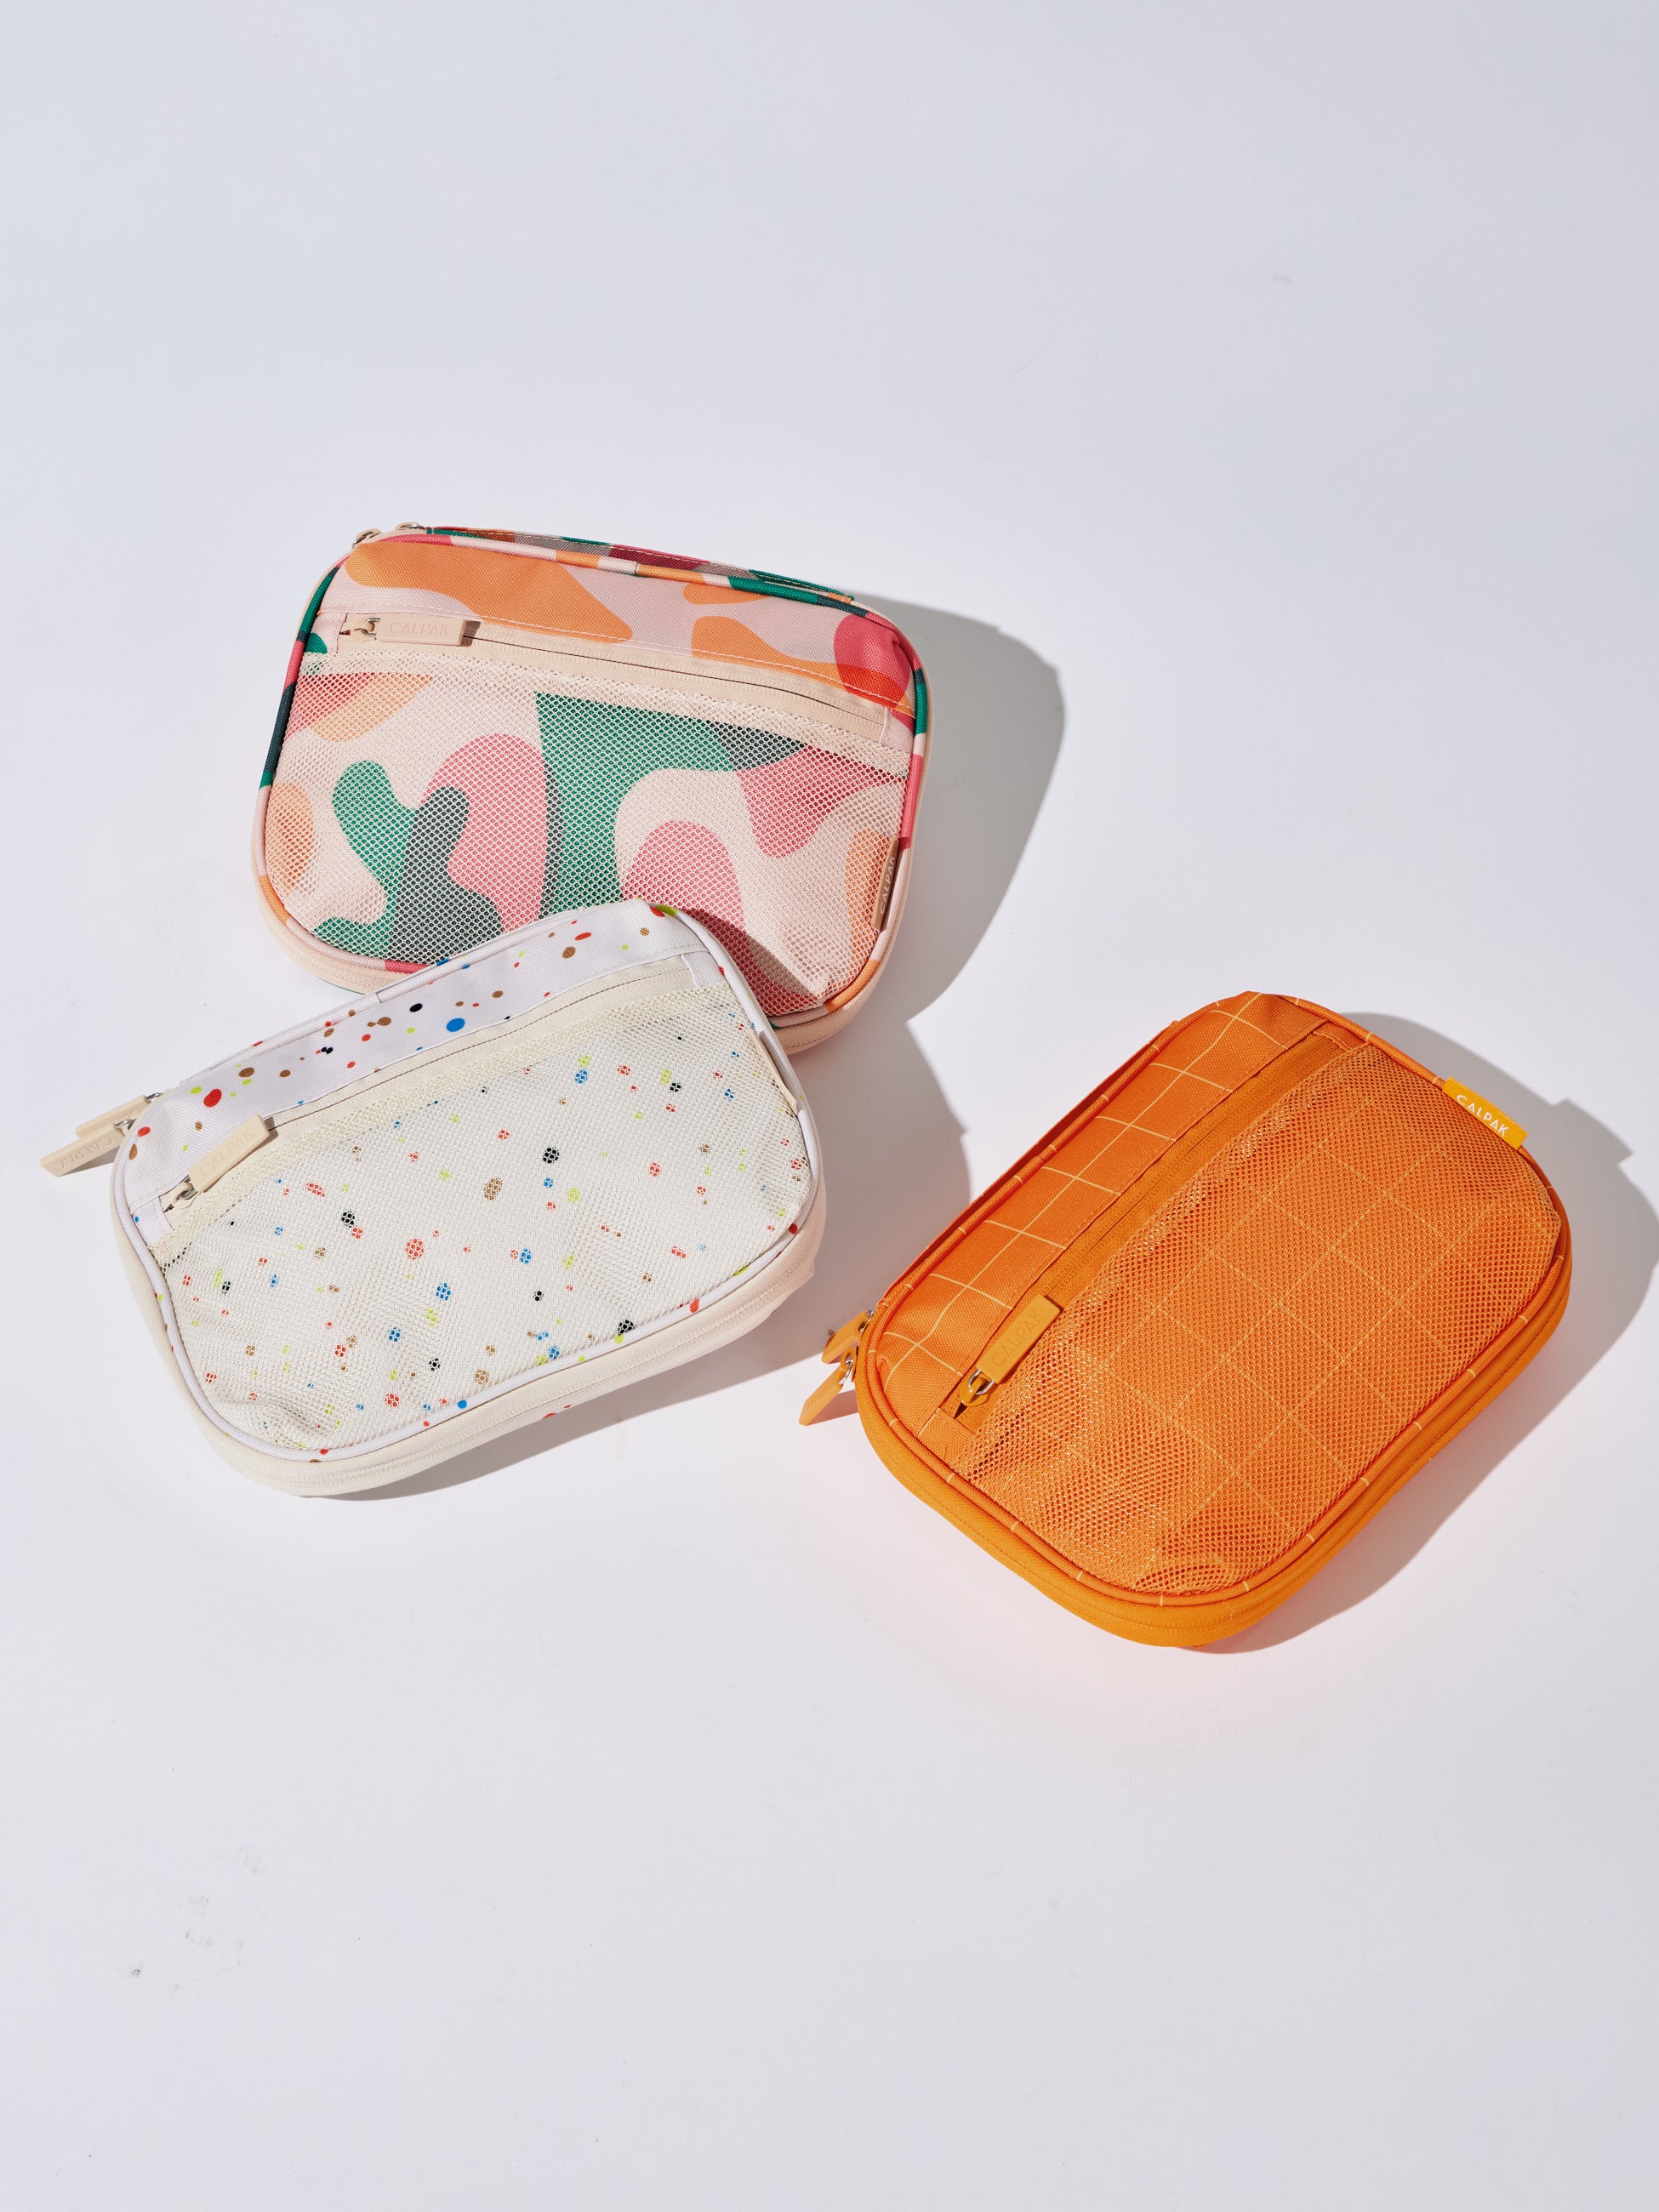 CALPAK tech and electronics organizers for school in modern abstract, speckle and orange grid